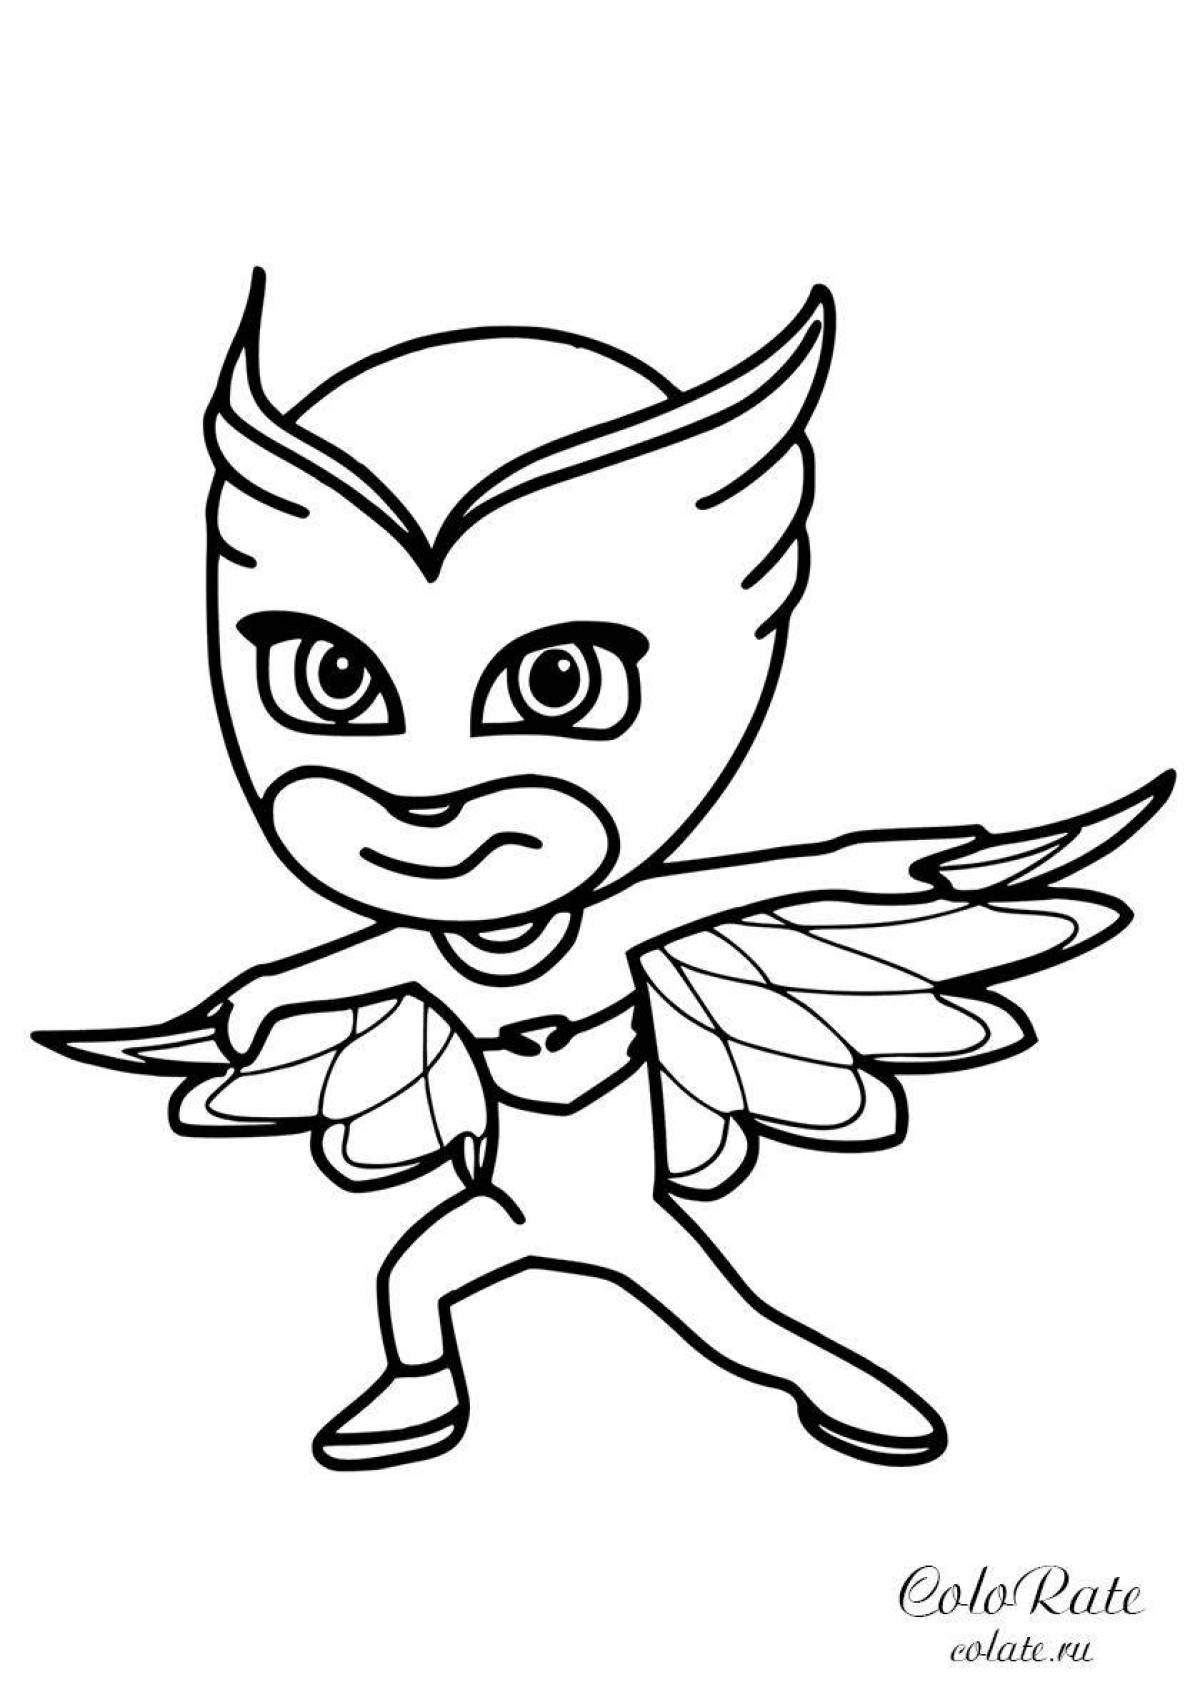 Impressive hero coloring pages